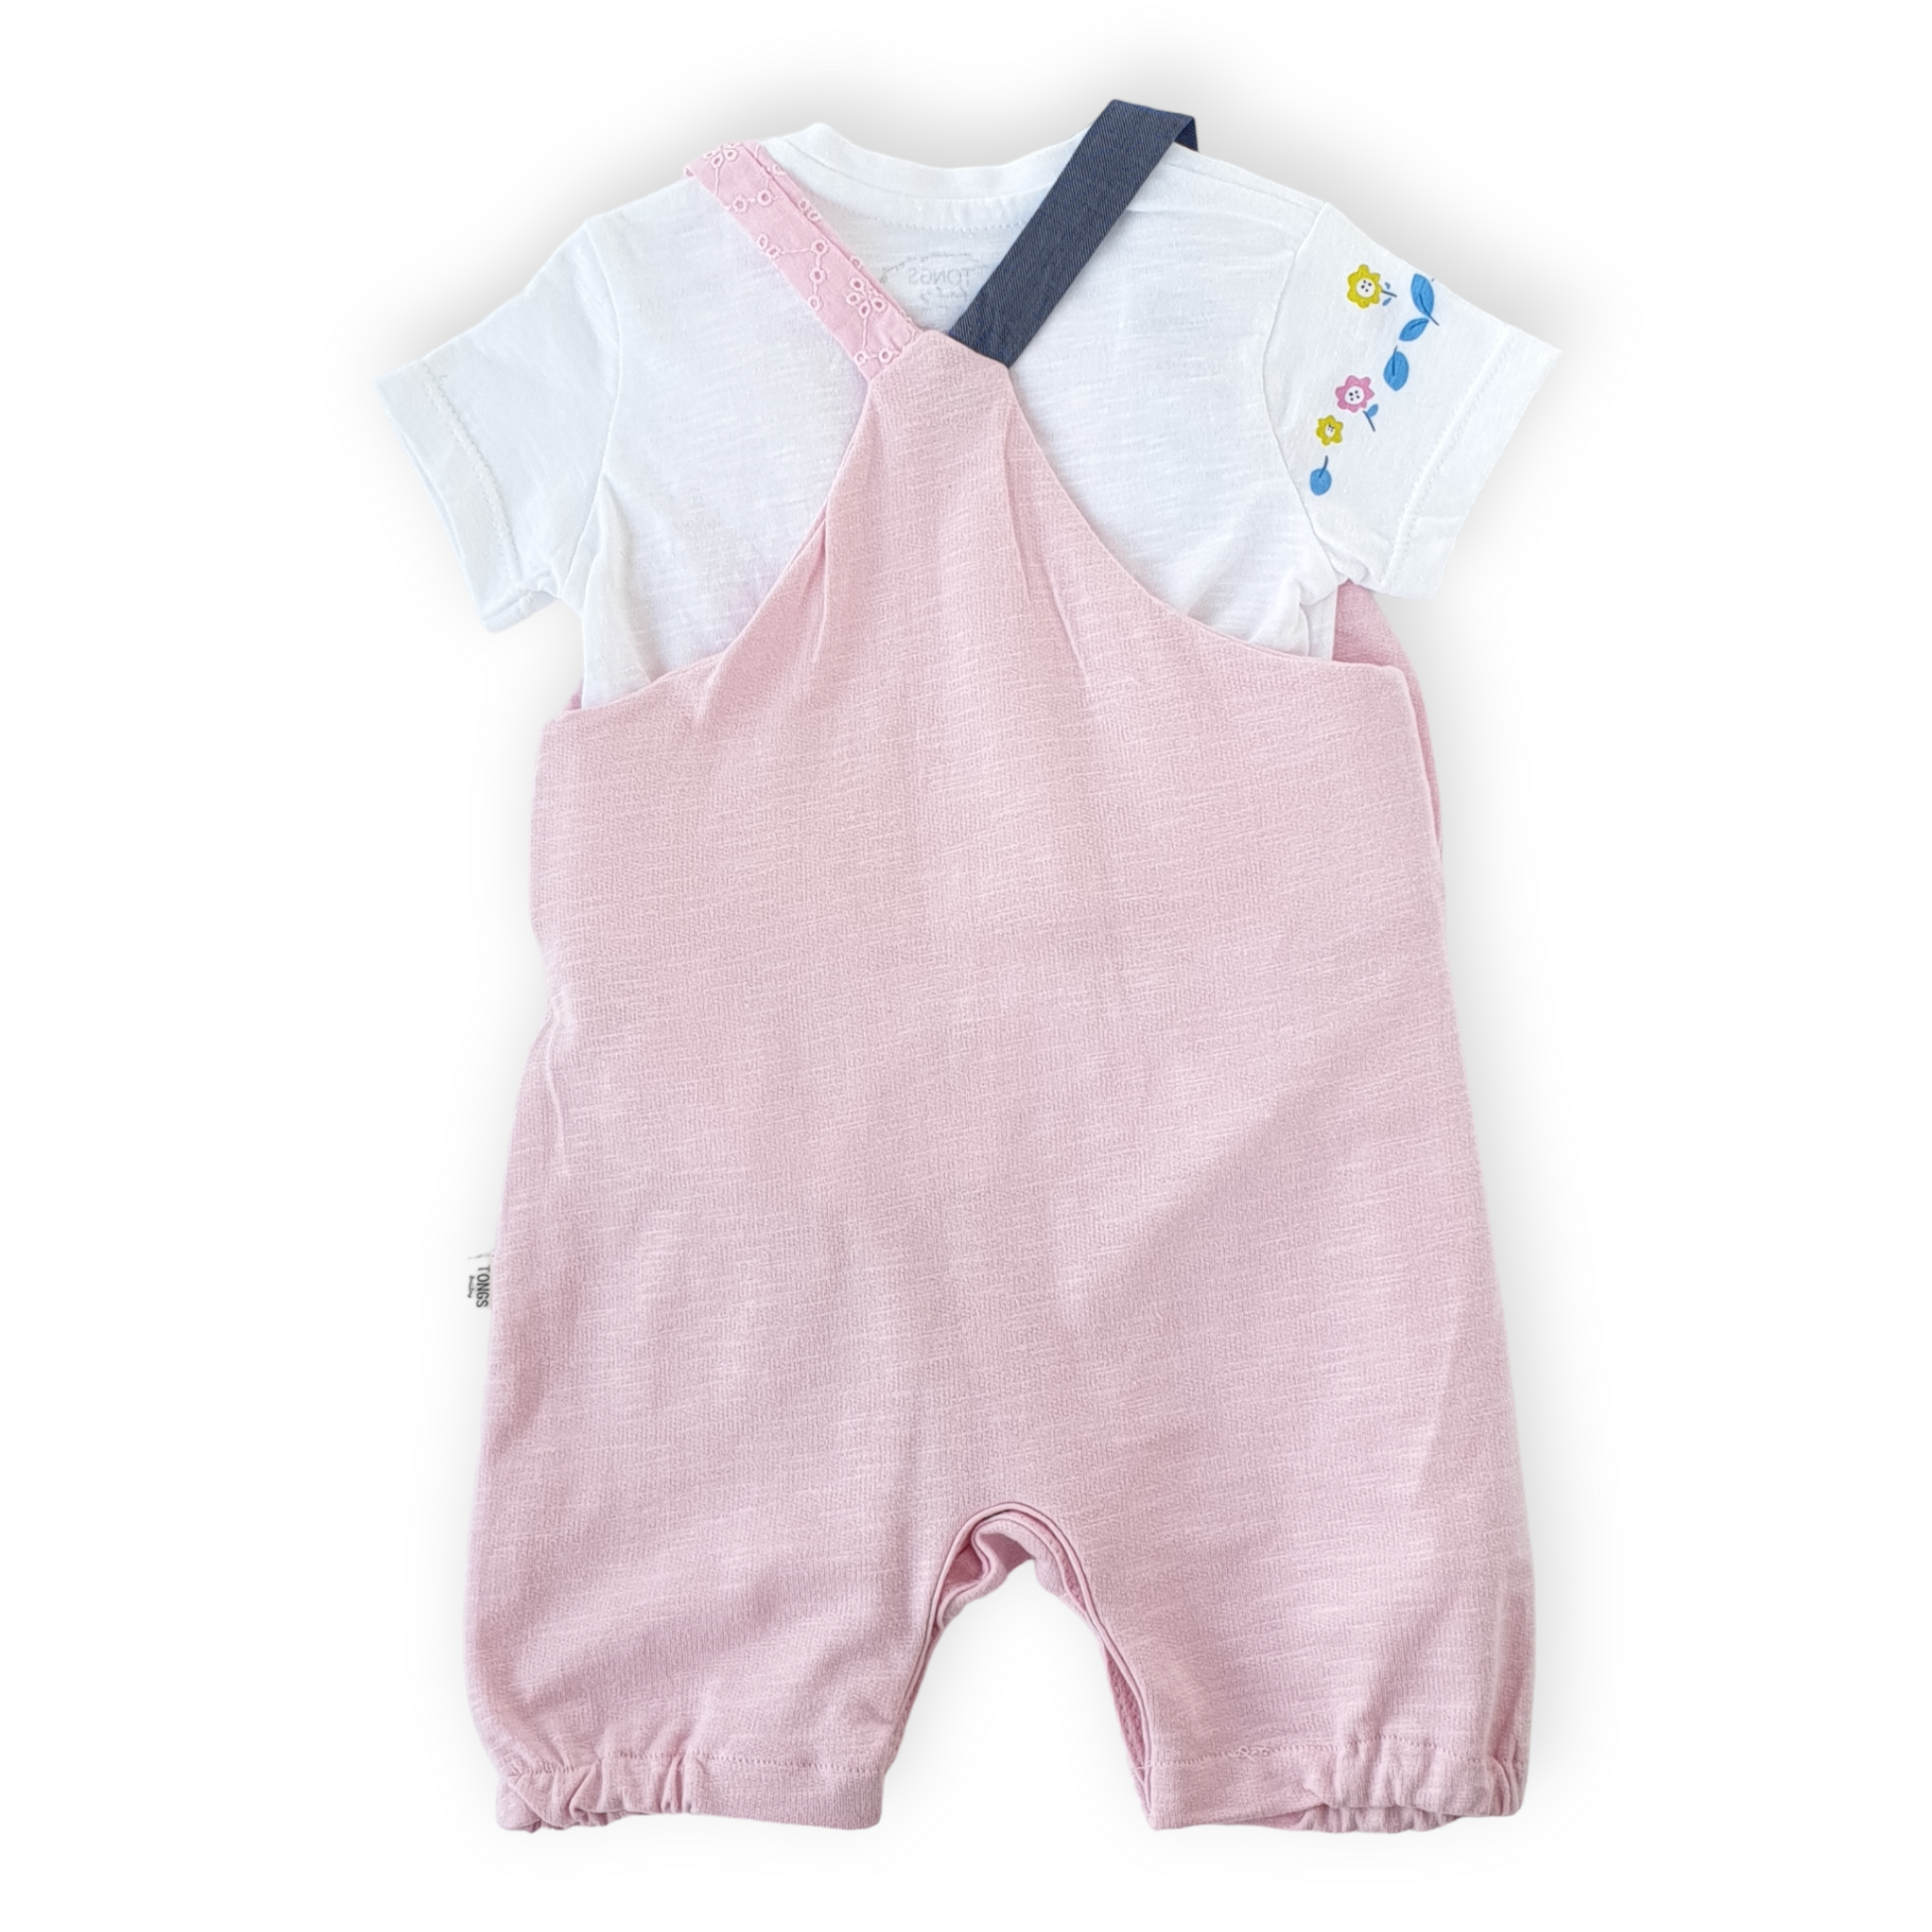 Have a Good Day Salopette-Catgirl, Catset2pcs, Girl, Overall, Pink, Salopette, Shirt, Short sleeve, SS23, White-Tongs-[Too Twee]-[Tootwee]-[baby]-[newborn]-[clothes]-[essentials]-[toys]-[Lebanon]